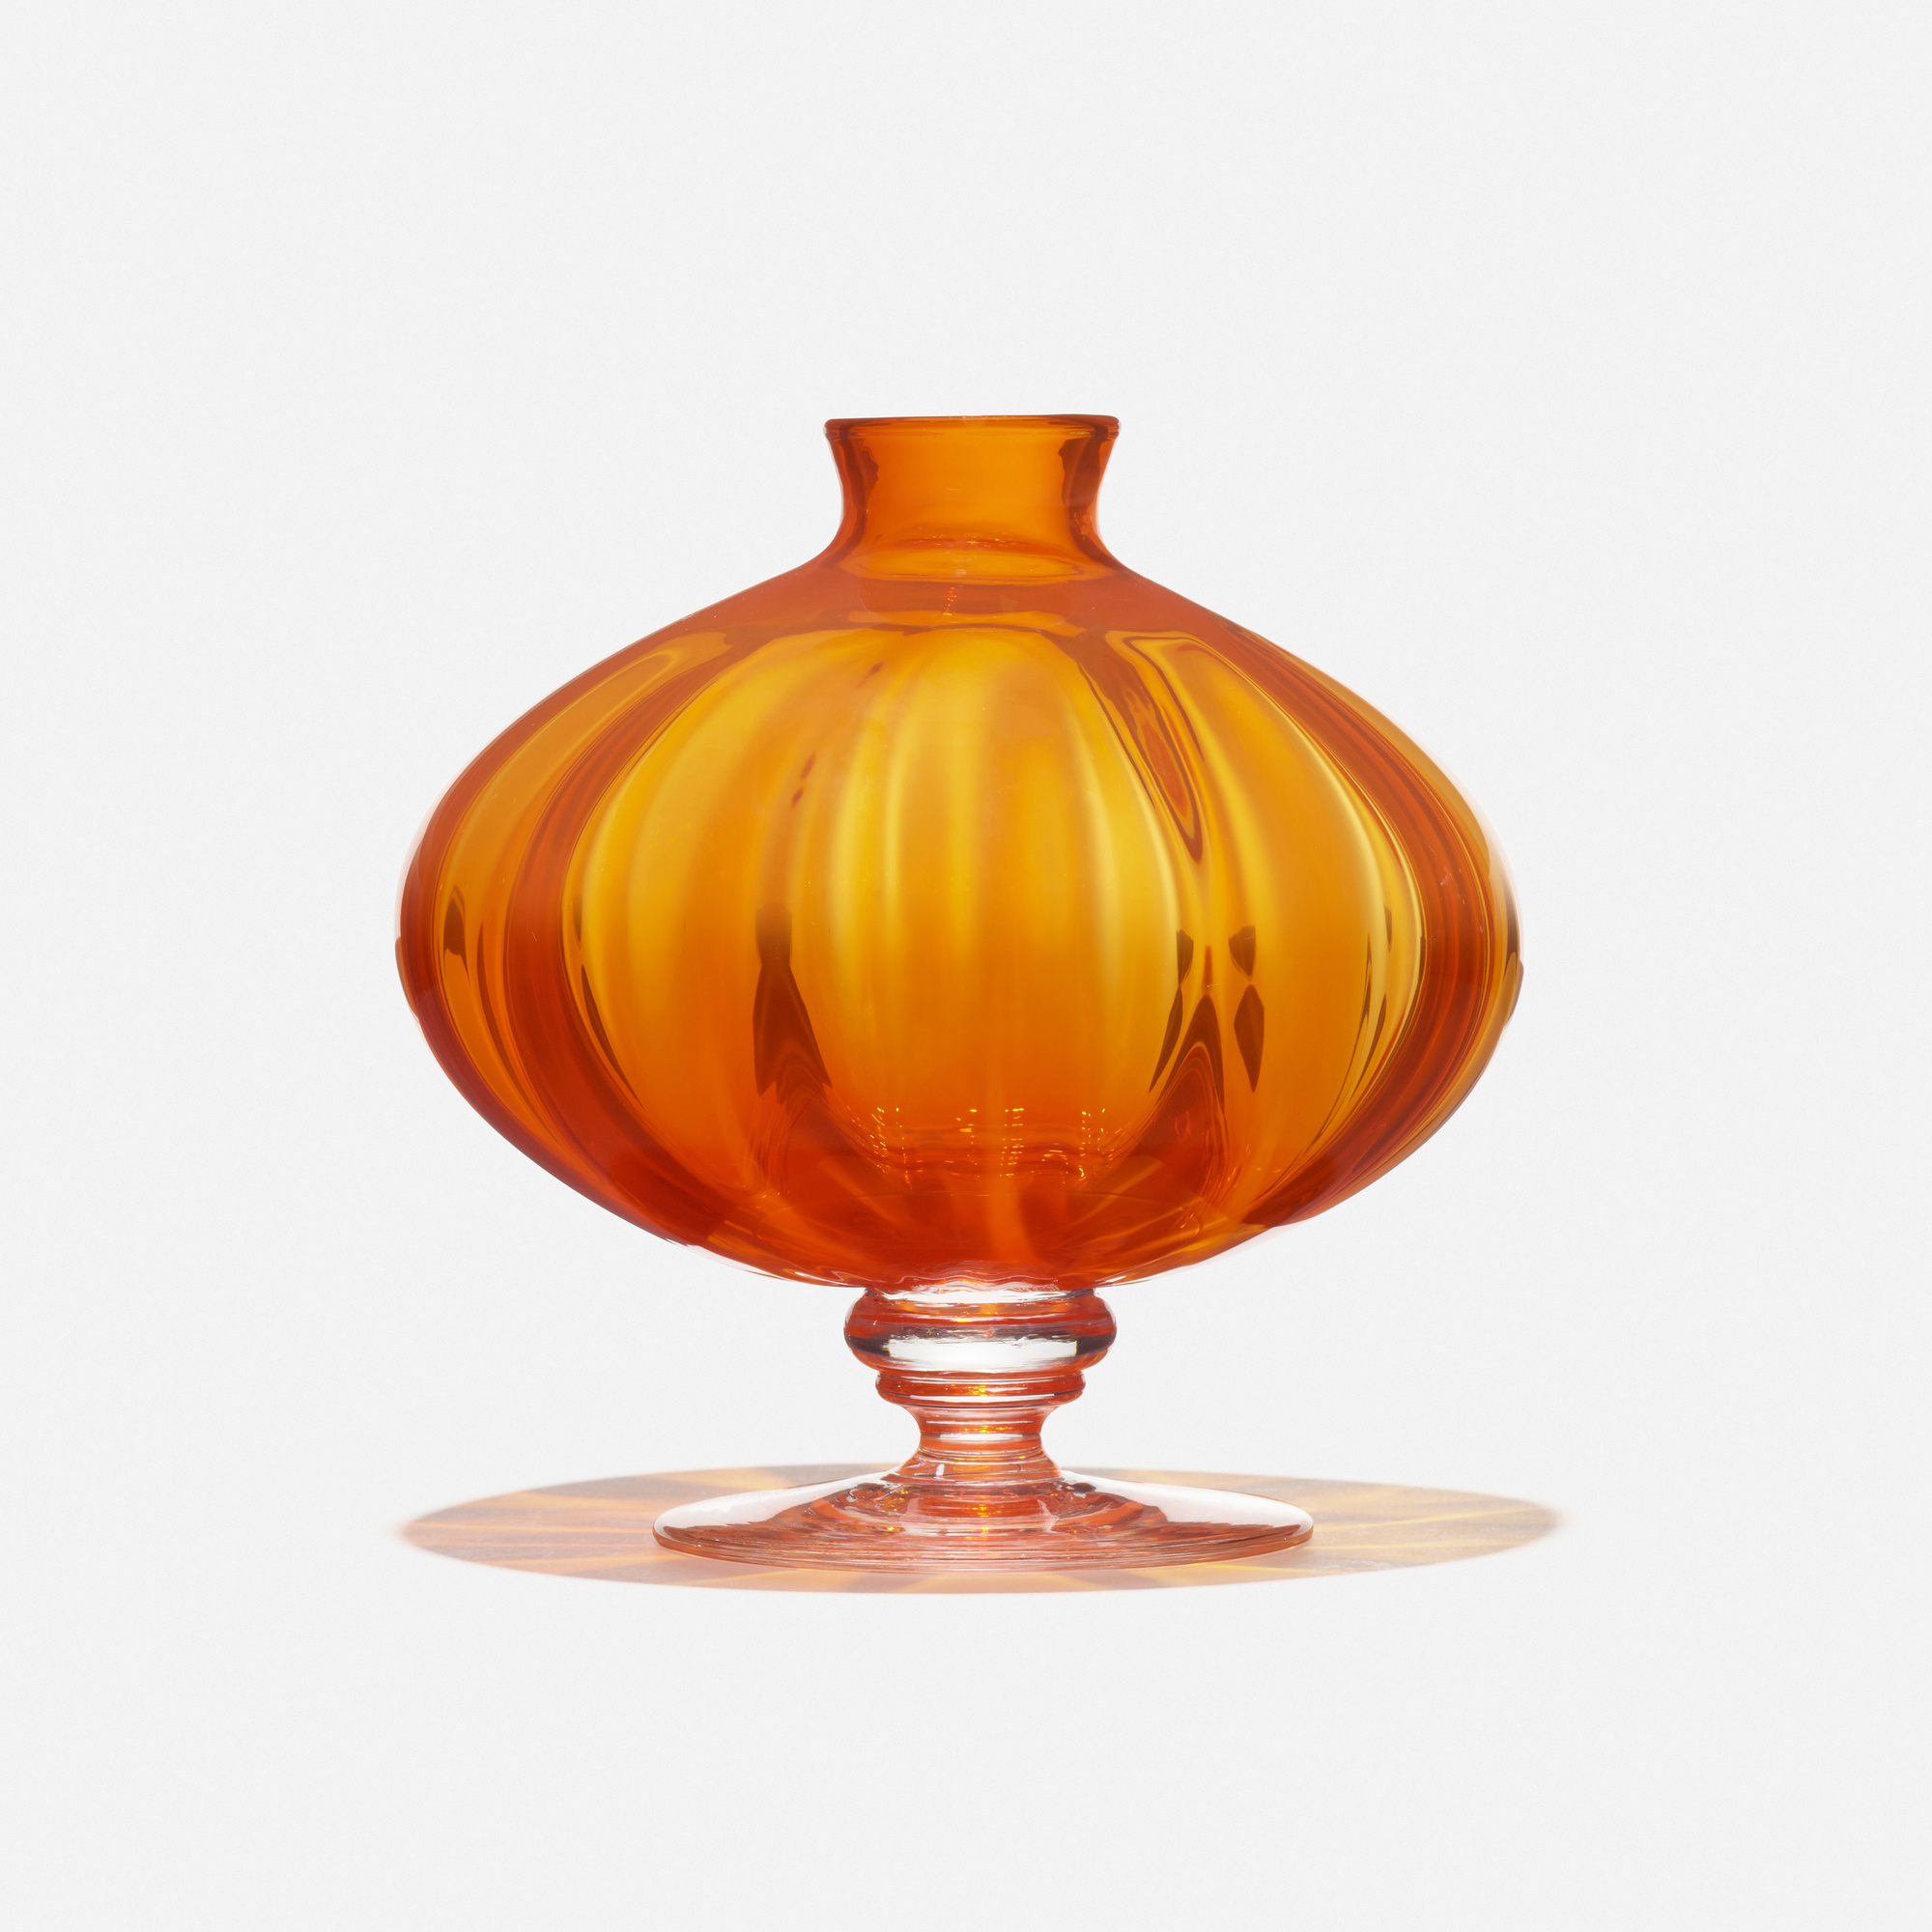 Digitaal Wonen Paard 109: MARCEL WANDERS, Orange Vase Royal Copper < Be Original Americas  Benefit Auction, 26 March 2023 < Auctions | Wright: Auctions of Art and  Design